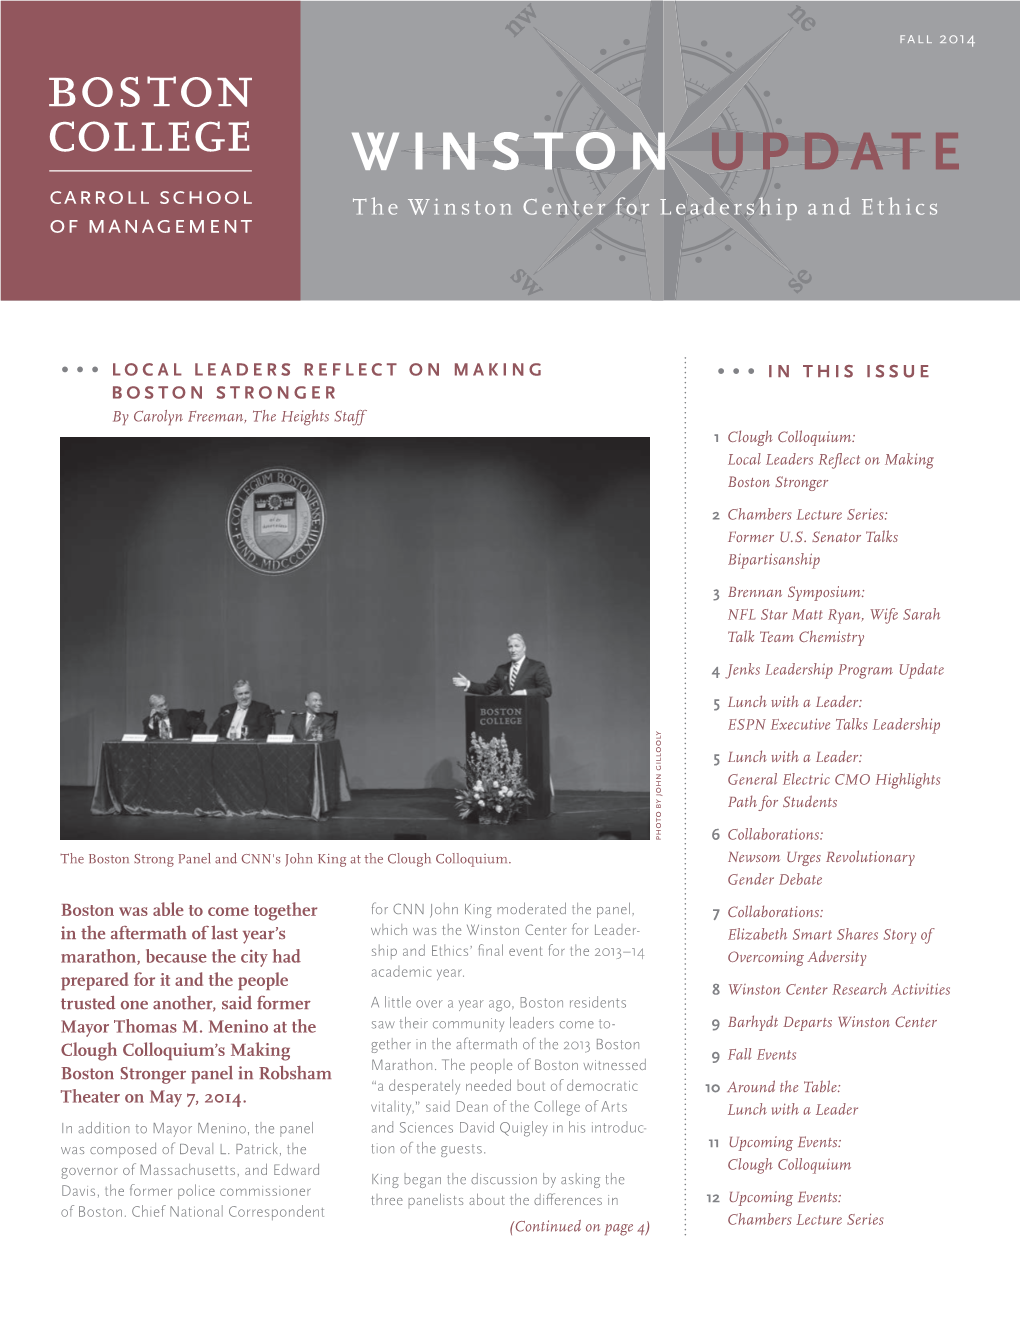 WINSTON UPDATE the Winston Center for Leadership and Ethics